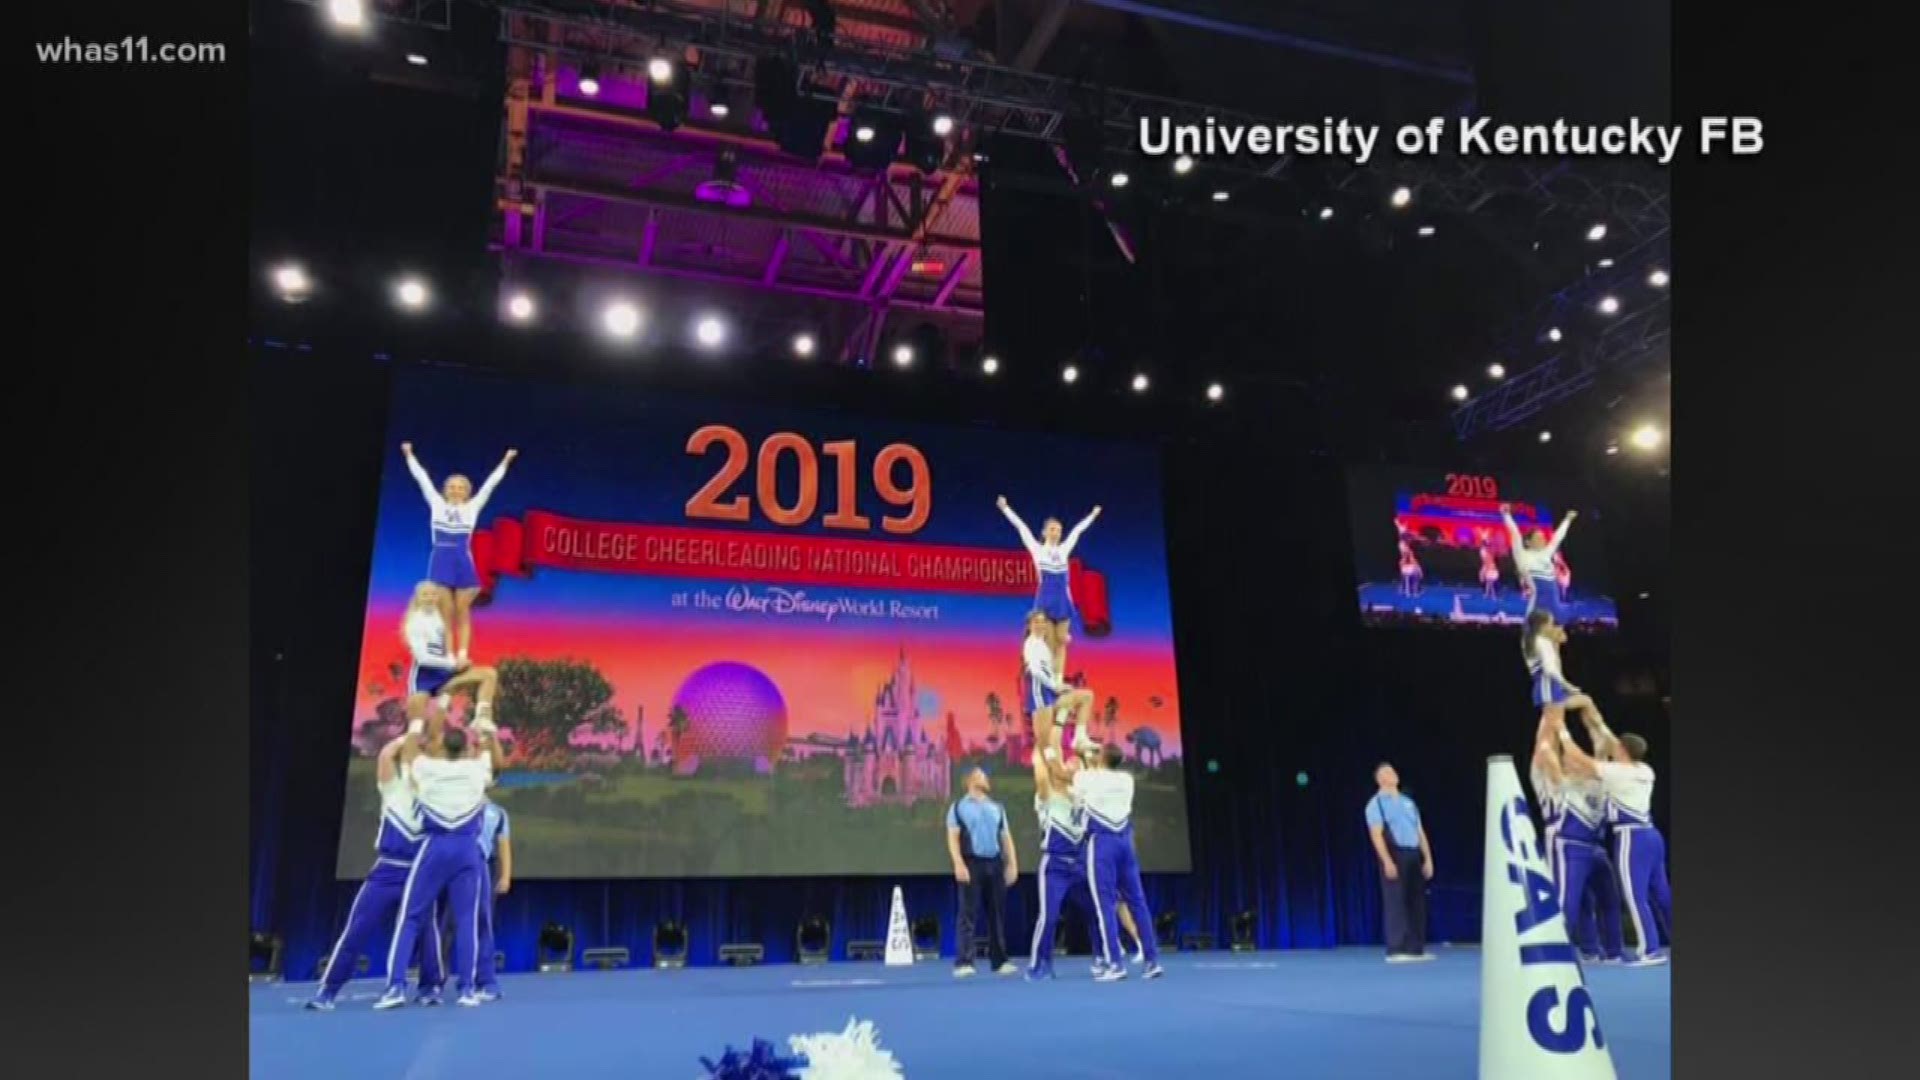 The University of Kentucky cheerleaders just won their 24th national championship!